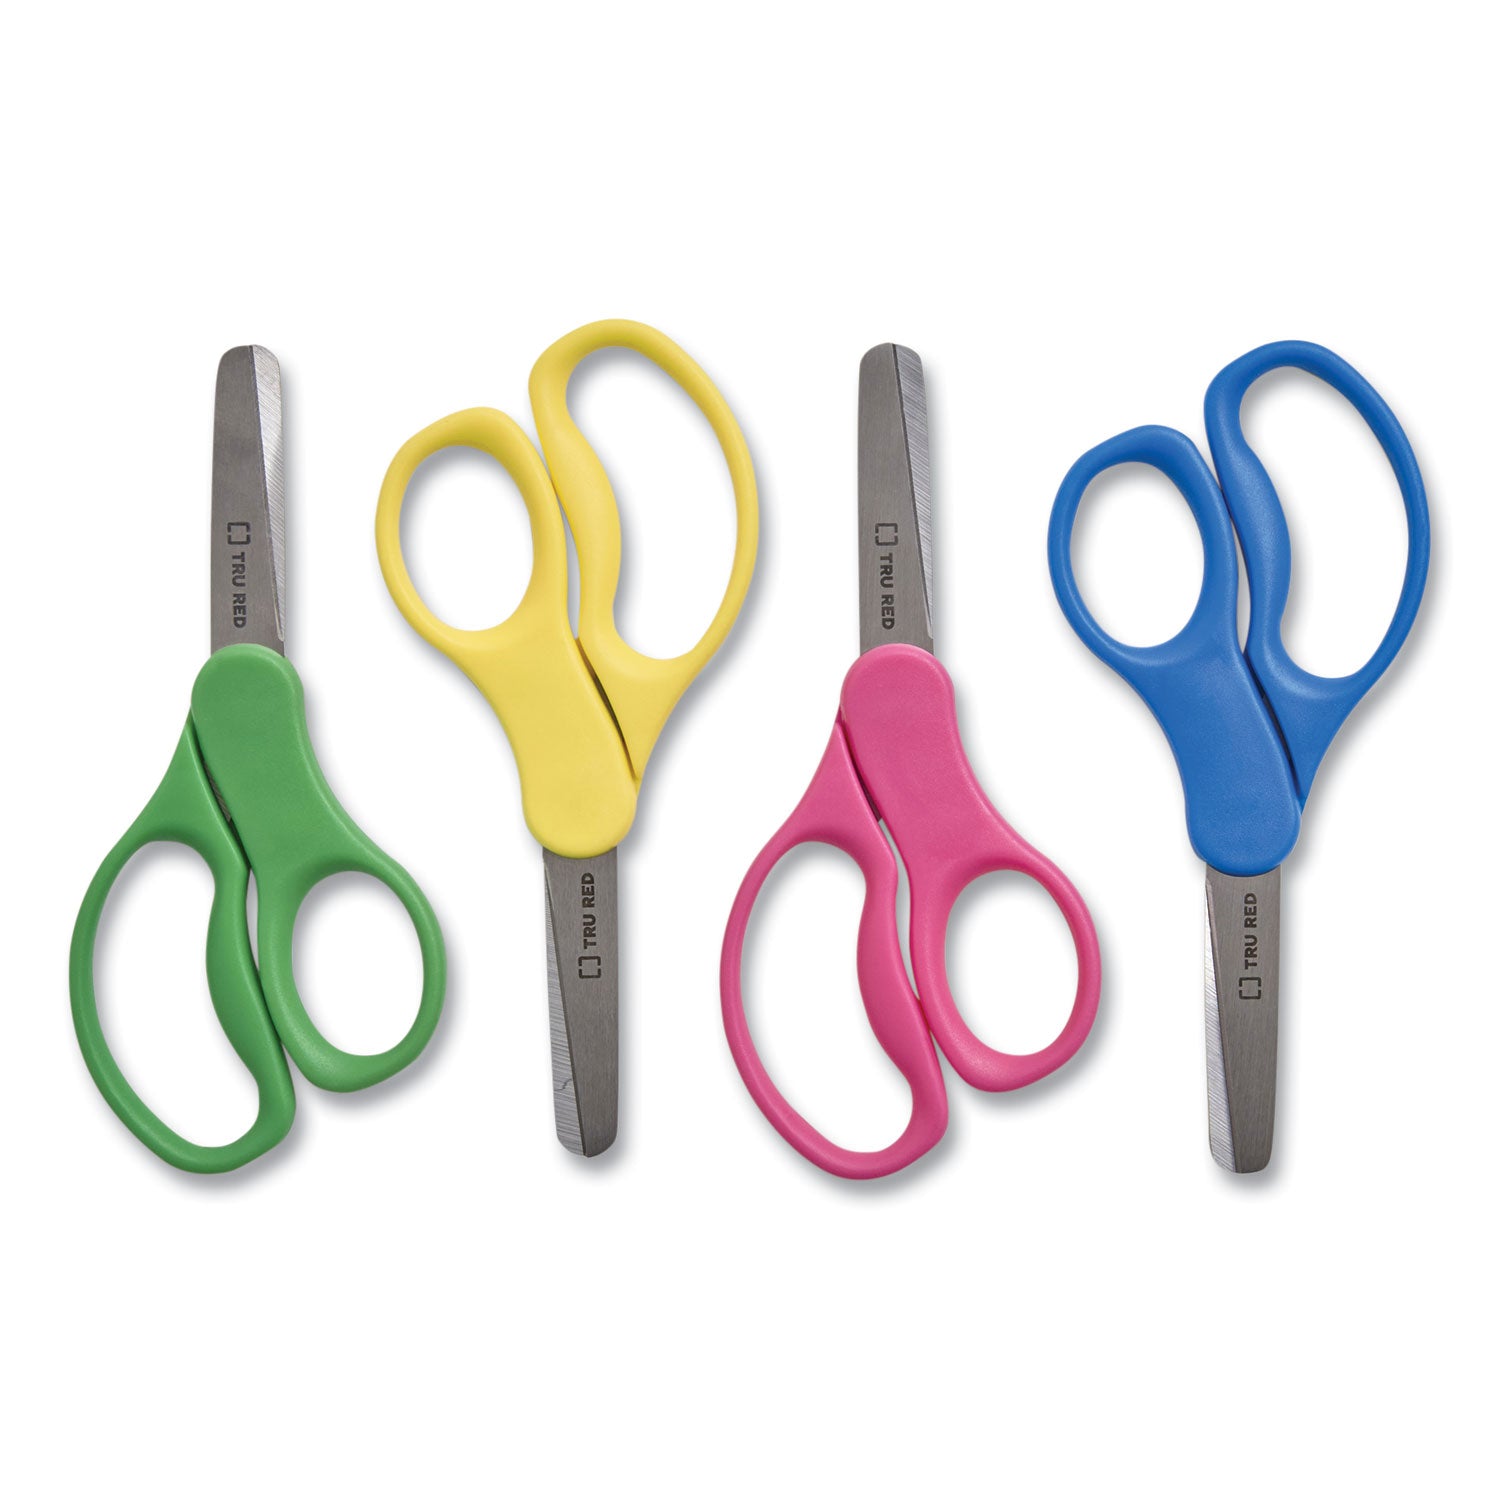 kids-blunt-tip-stainless-steel-safety-scissors-5-long-205-cut-length-assorted-straight-handles-24-pack_tud24380511 - 2